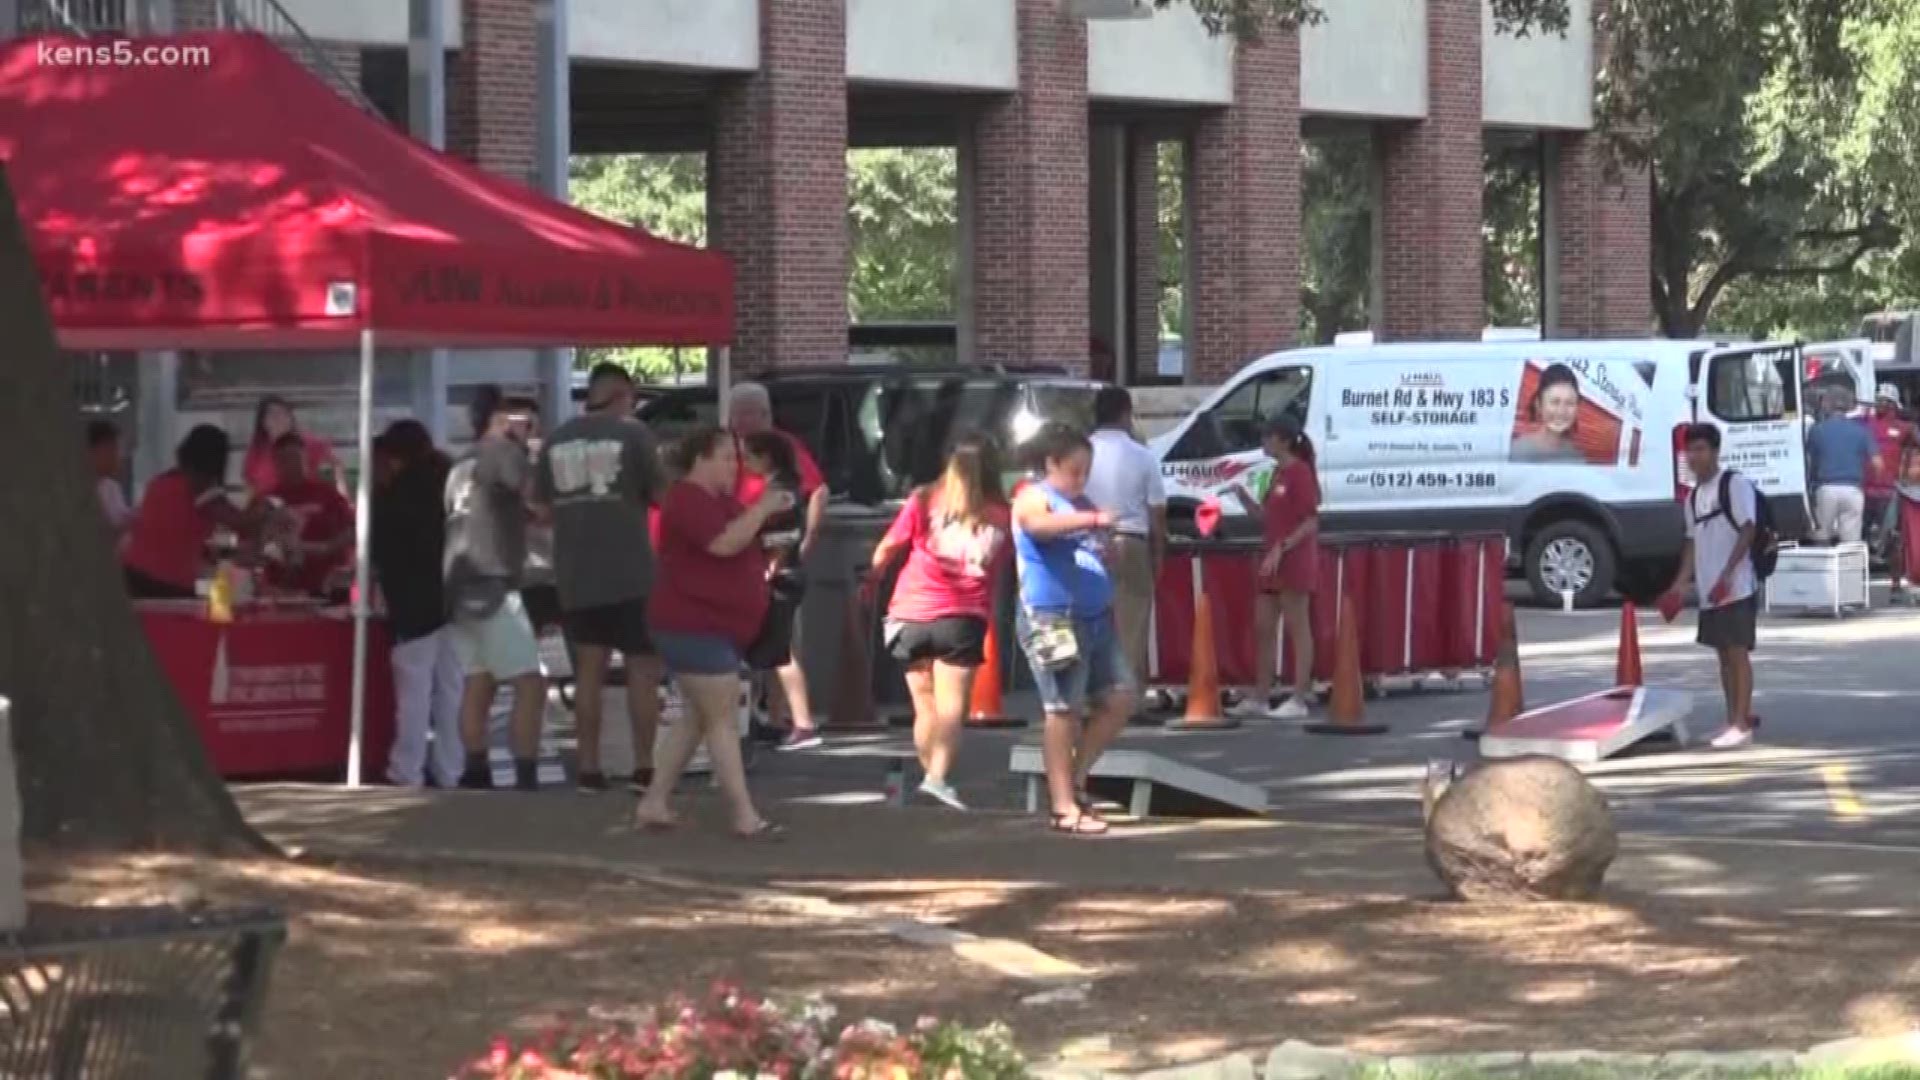 Incoming freshmen from all over the country arrived at the University of the Incarnate Word campus to move in on Thursday.